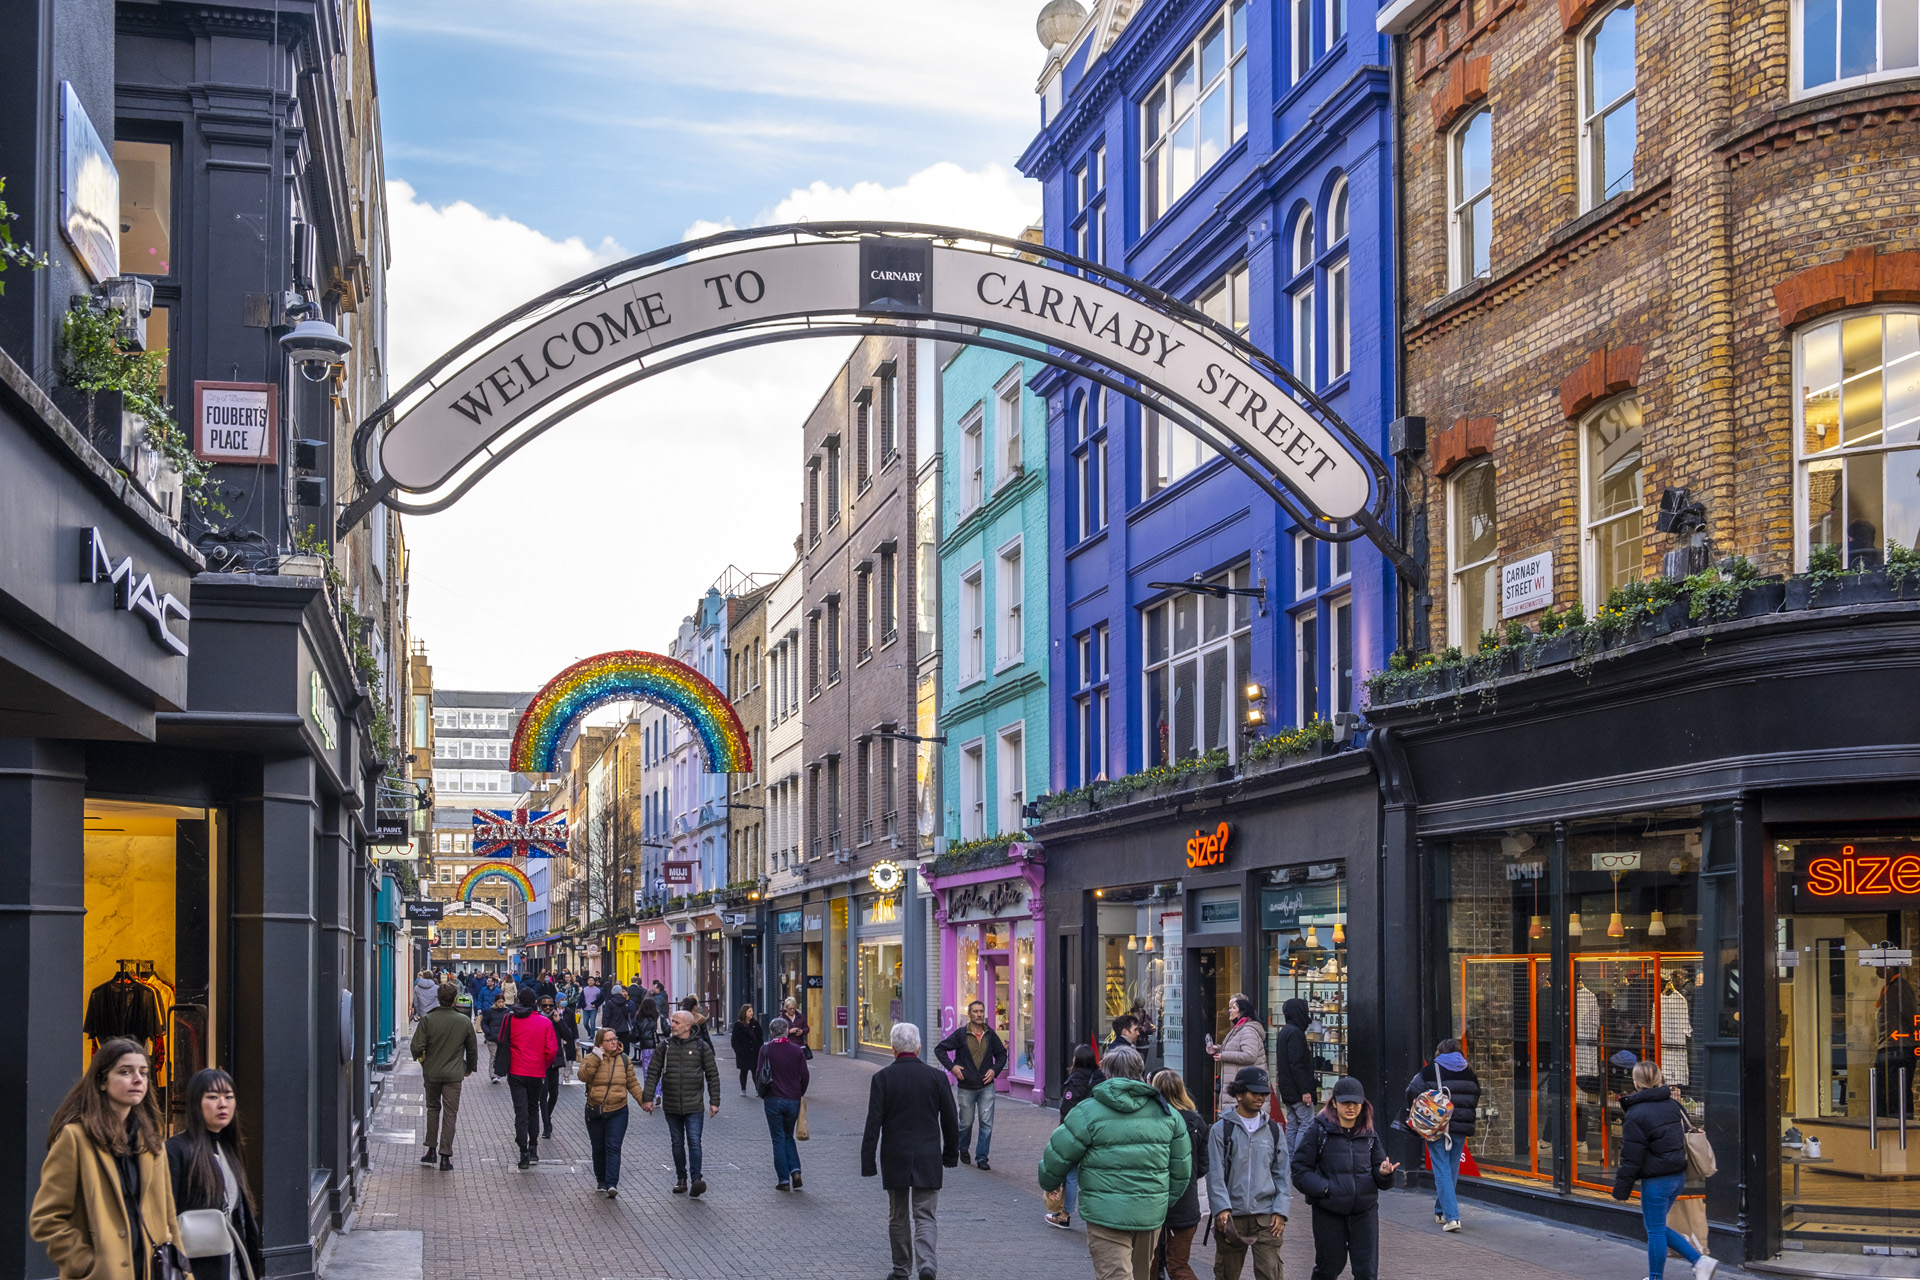 is-this-the-most-instagrammable-part-of-london?-–-exploring-carnaby